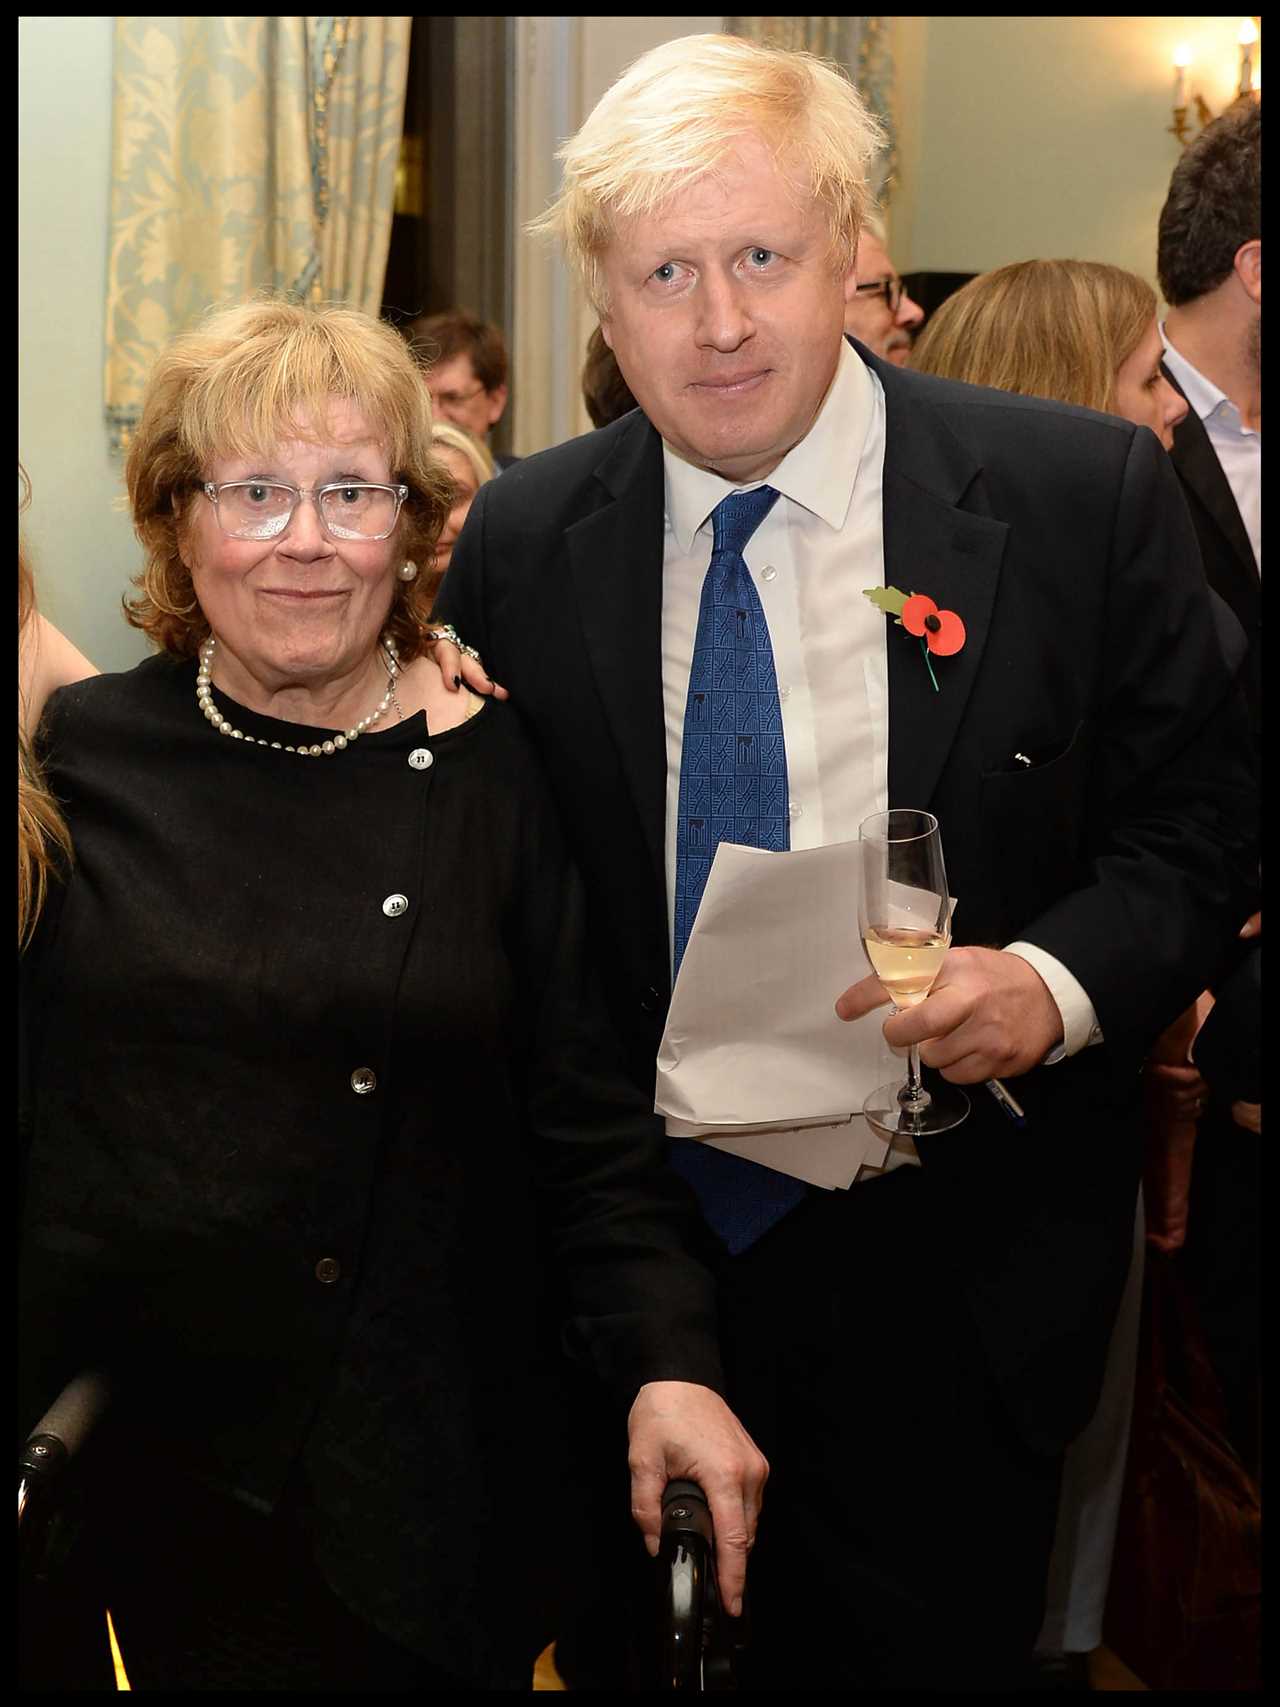 Boris Johnson’s mother Charlotte Wahl dies ‘suddenly and peacefully’ in hospital aged 79